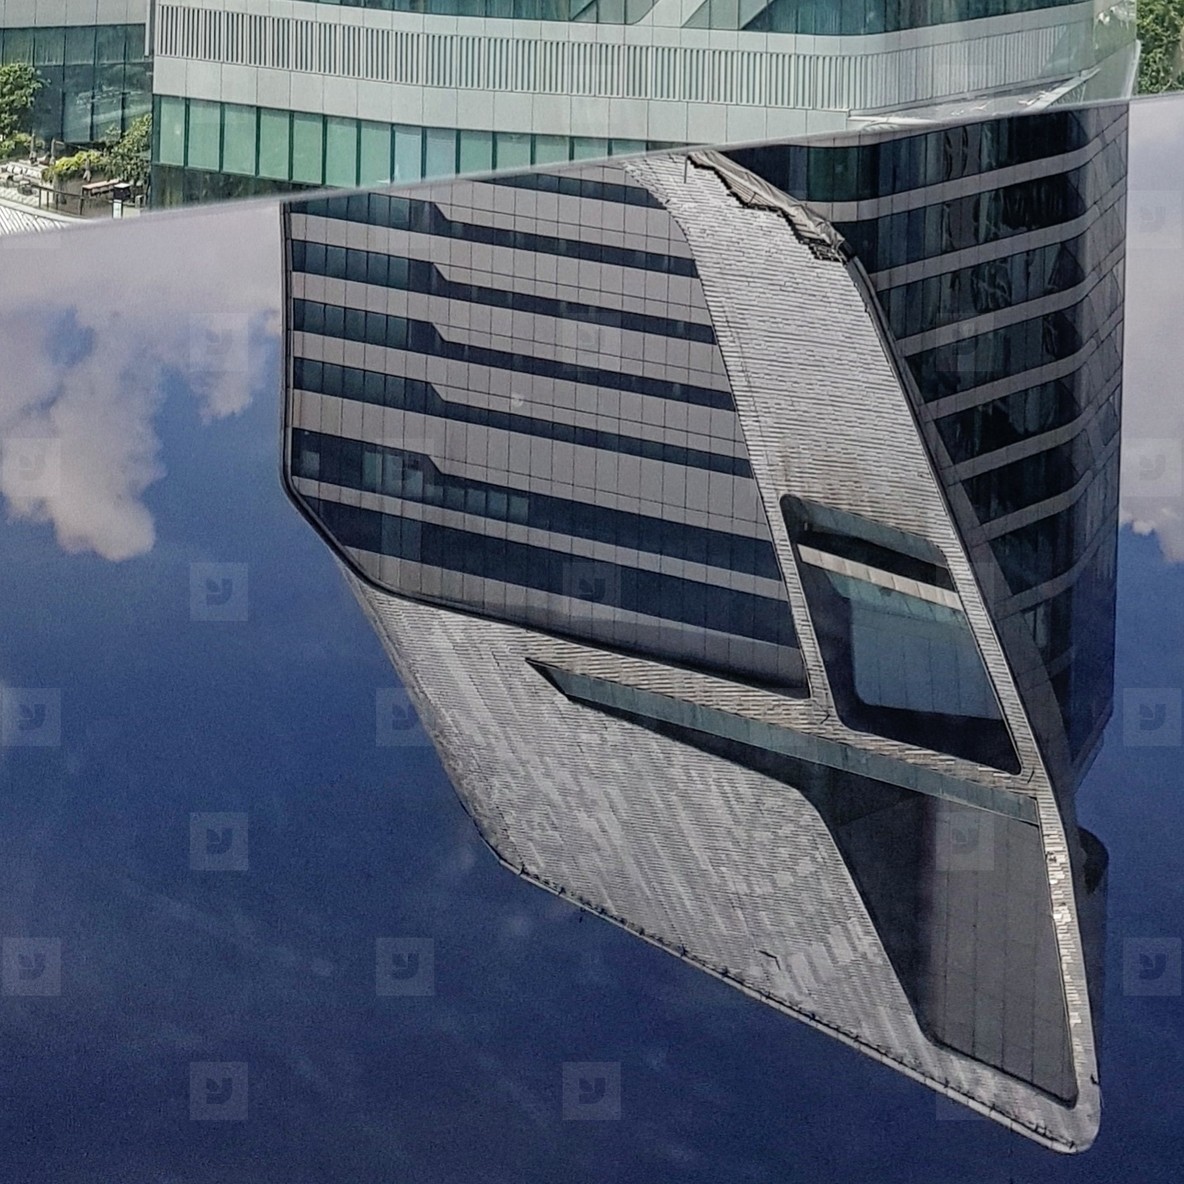 Building reflection